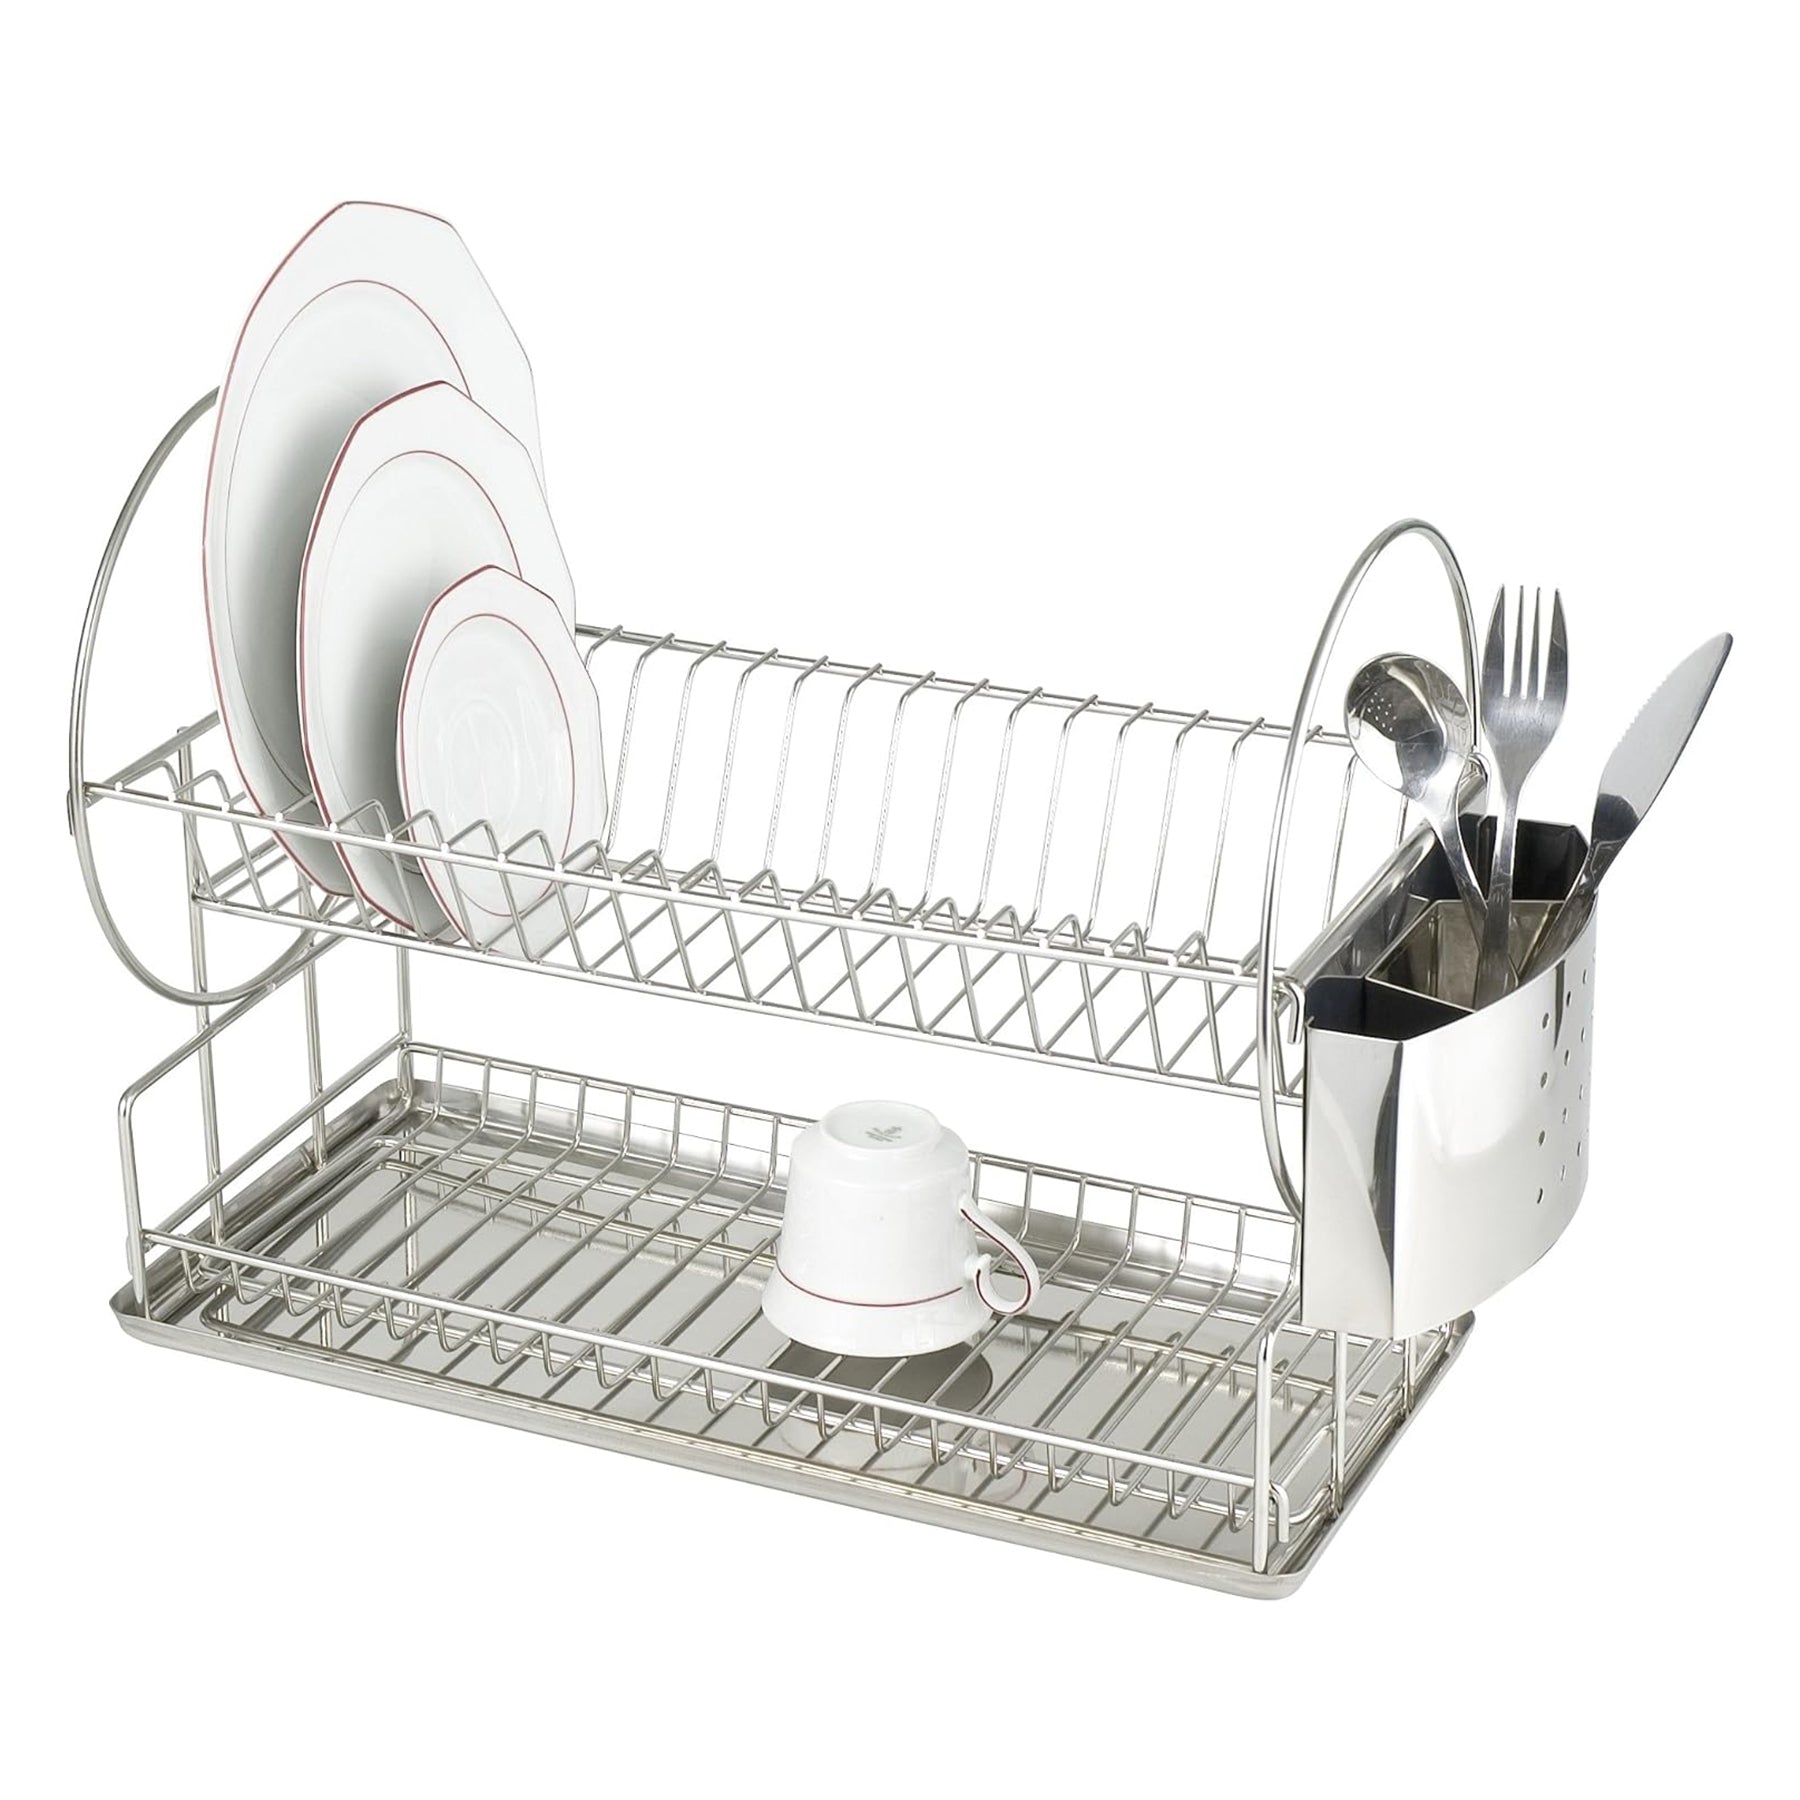 Dish Plate Holder - Silver